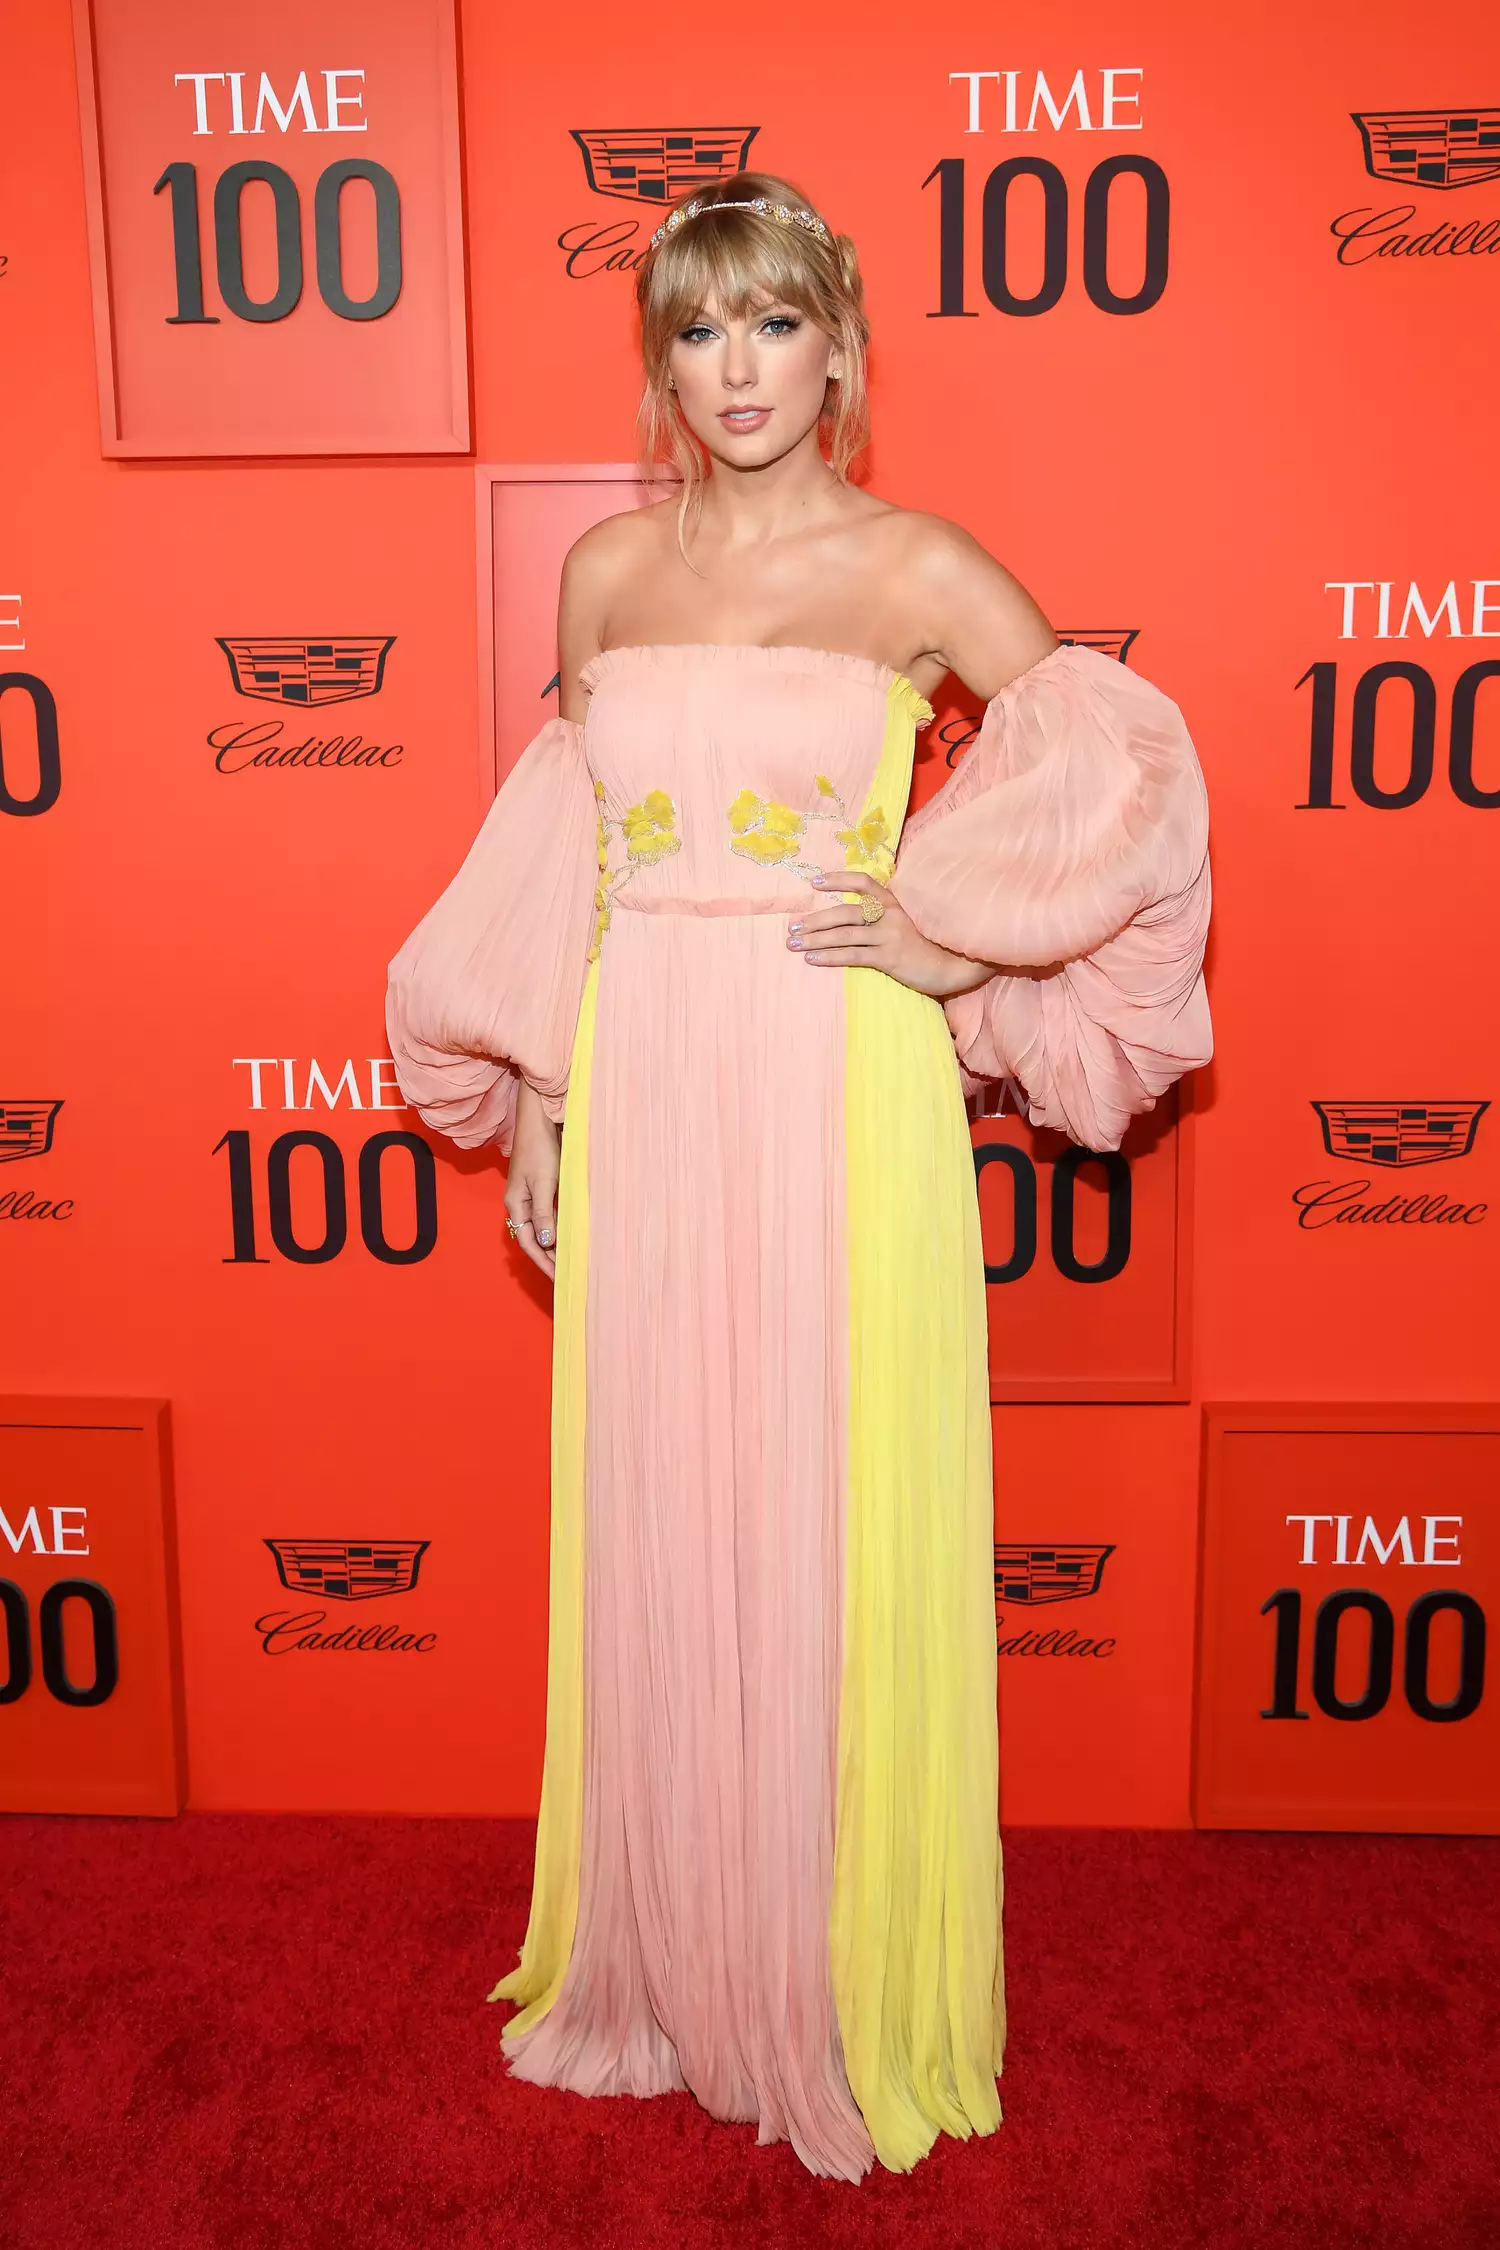 Taylor Swift on the red carpet at the TIME 100 Gala Red Carpet